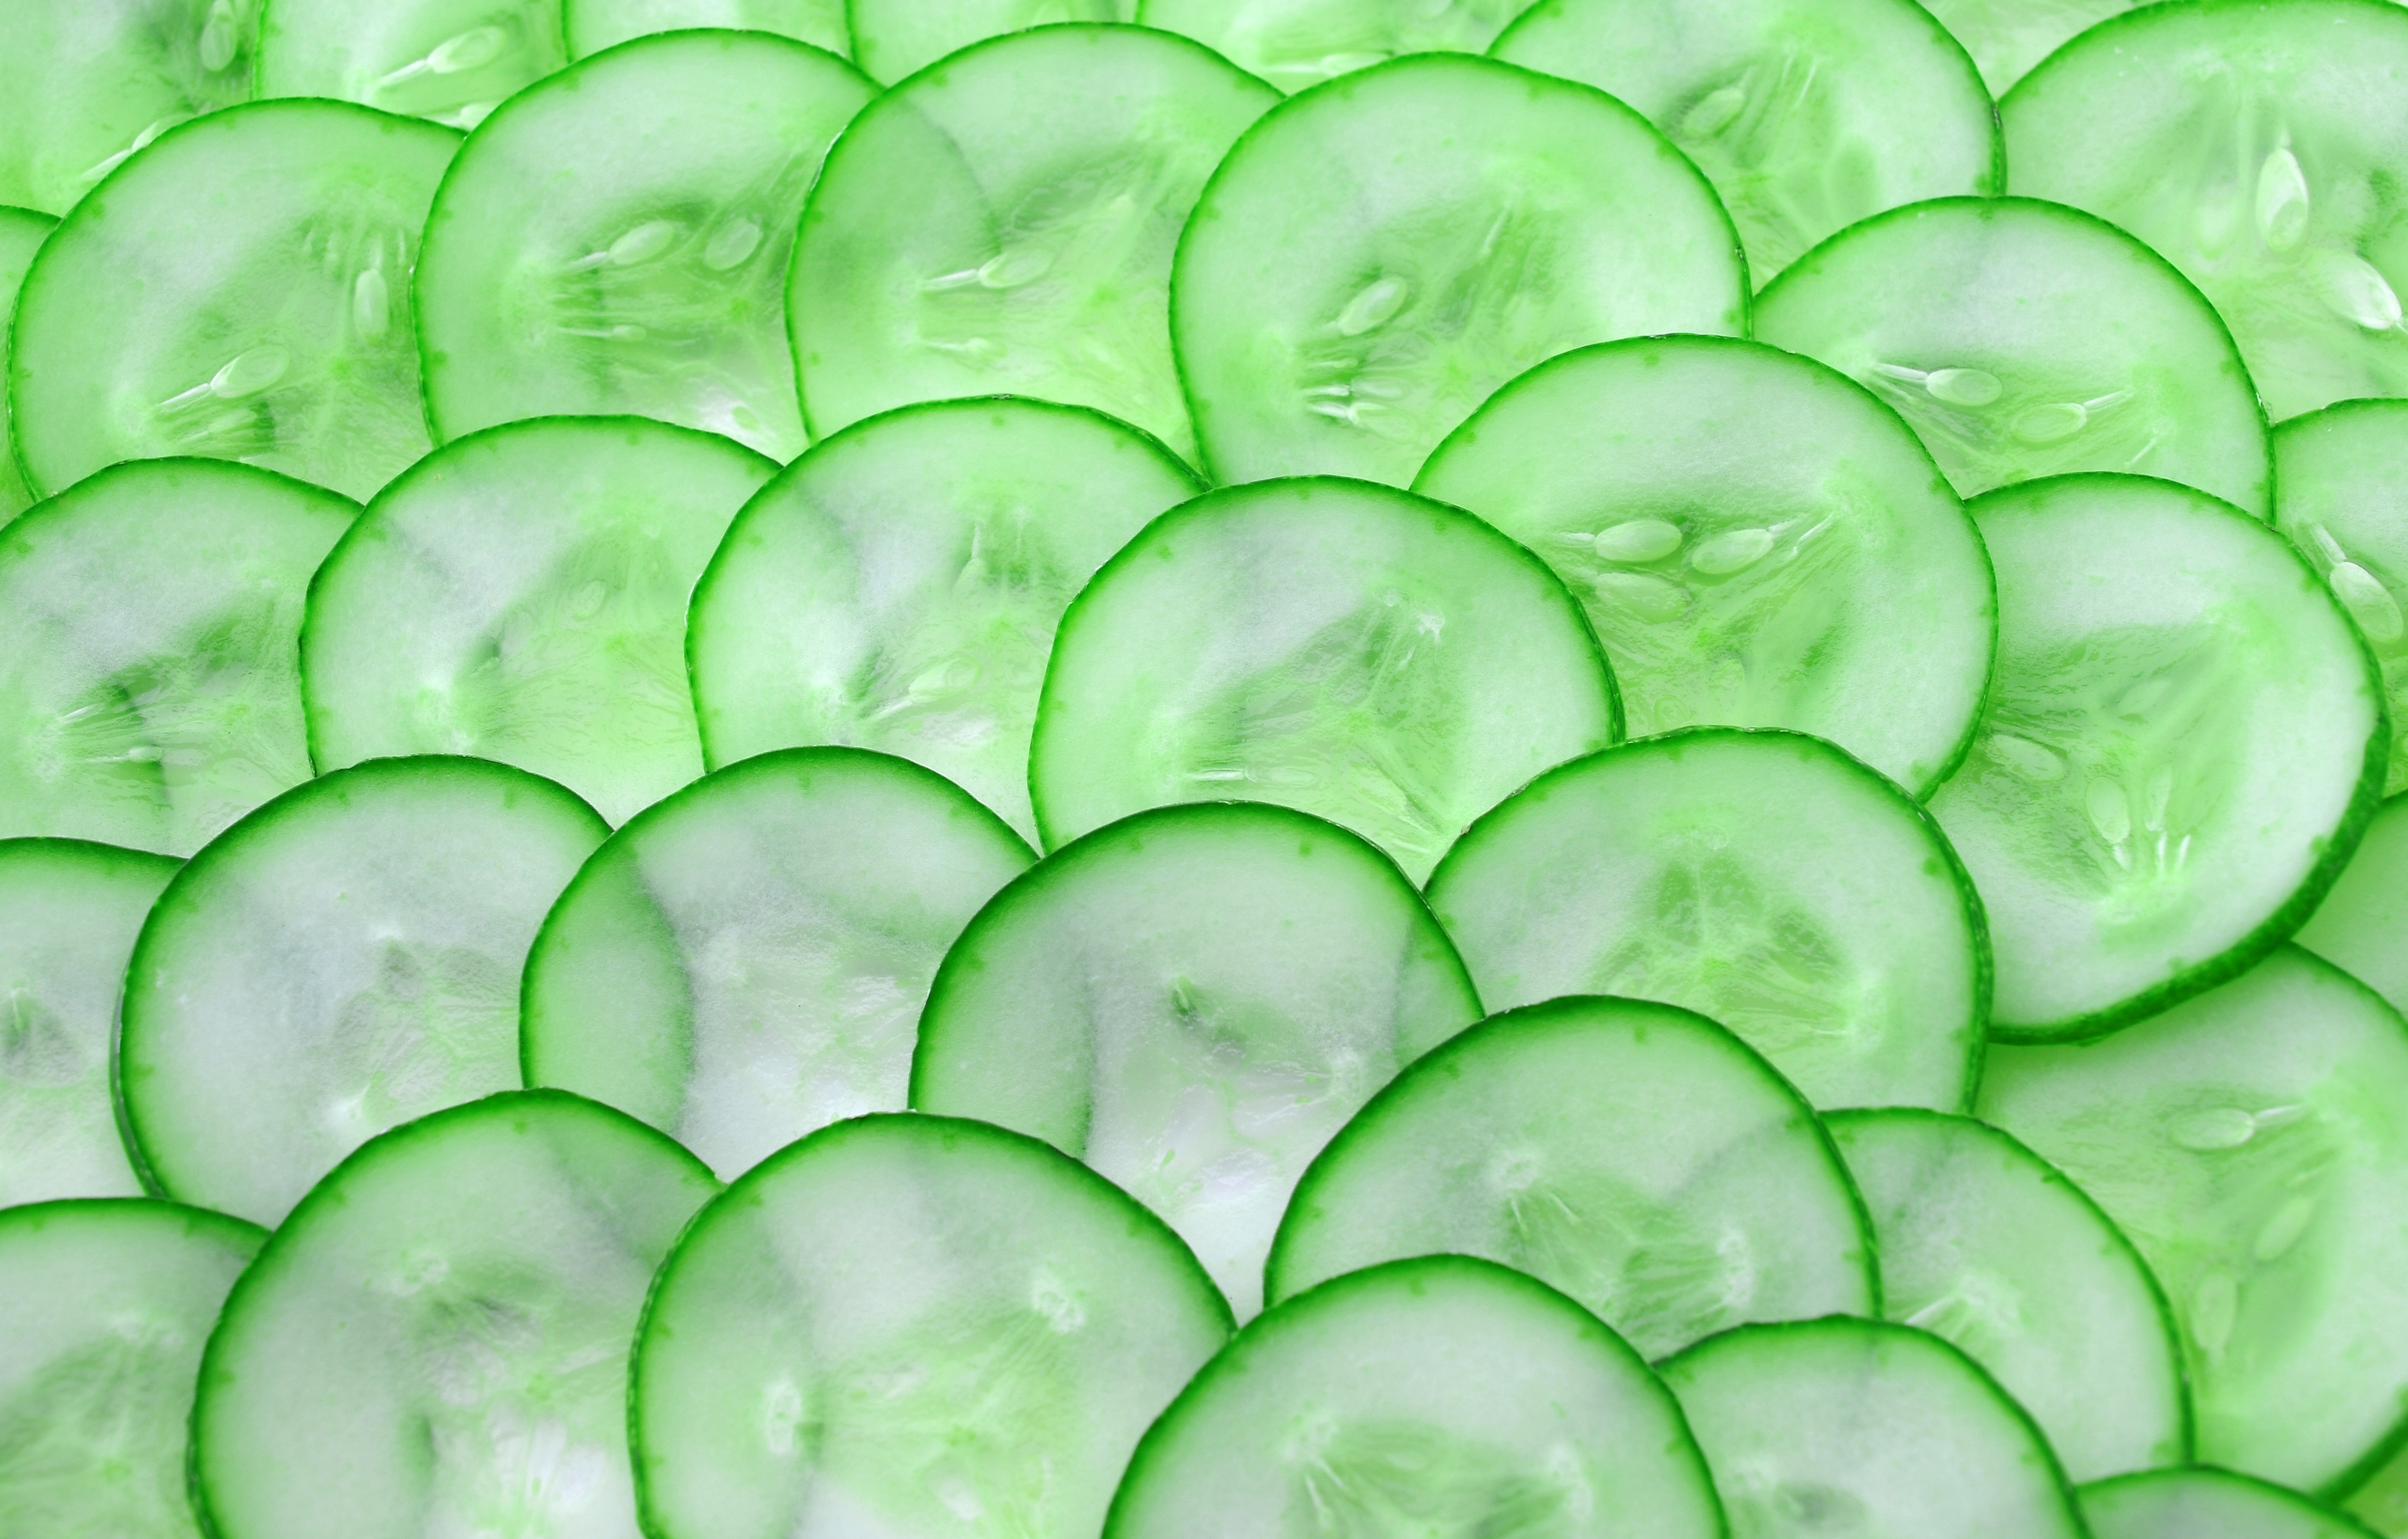 5 Things You Didn’t Know About Cucumbers